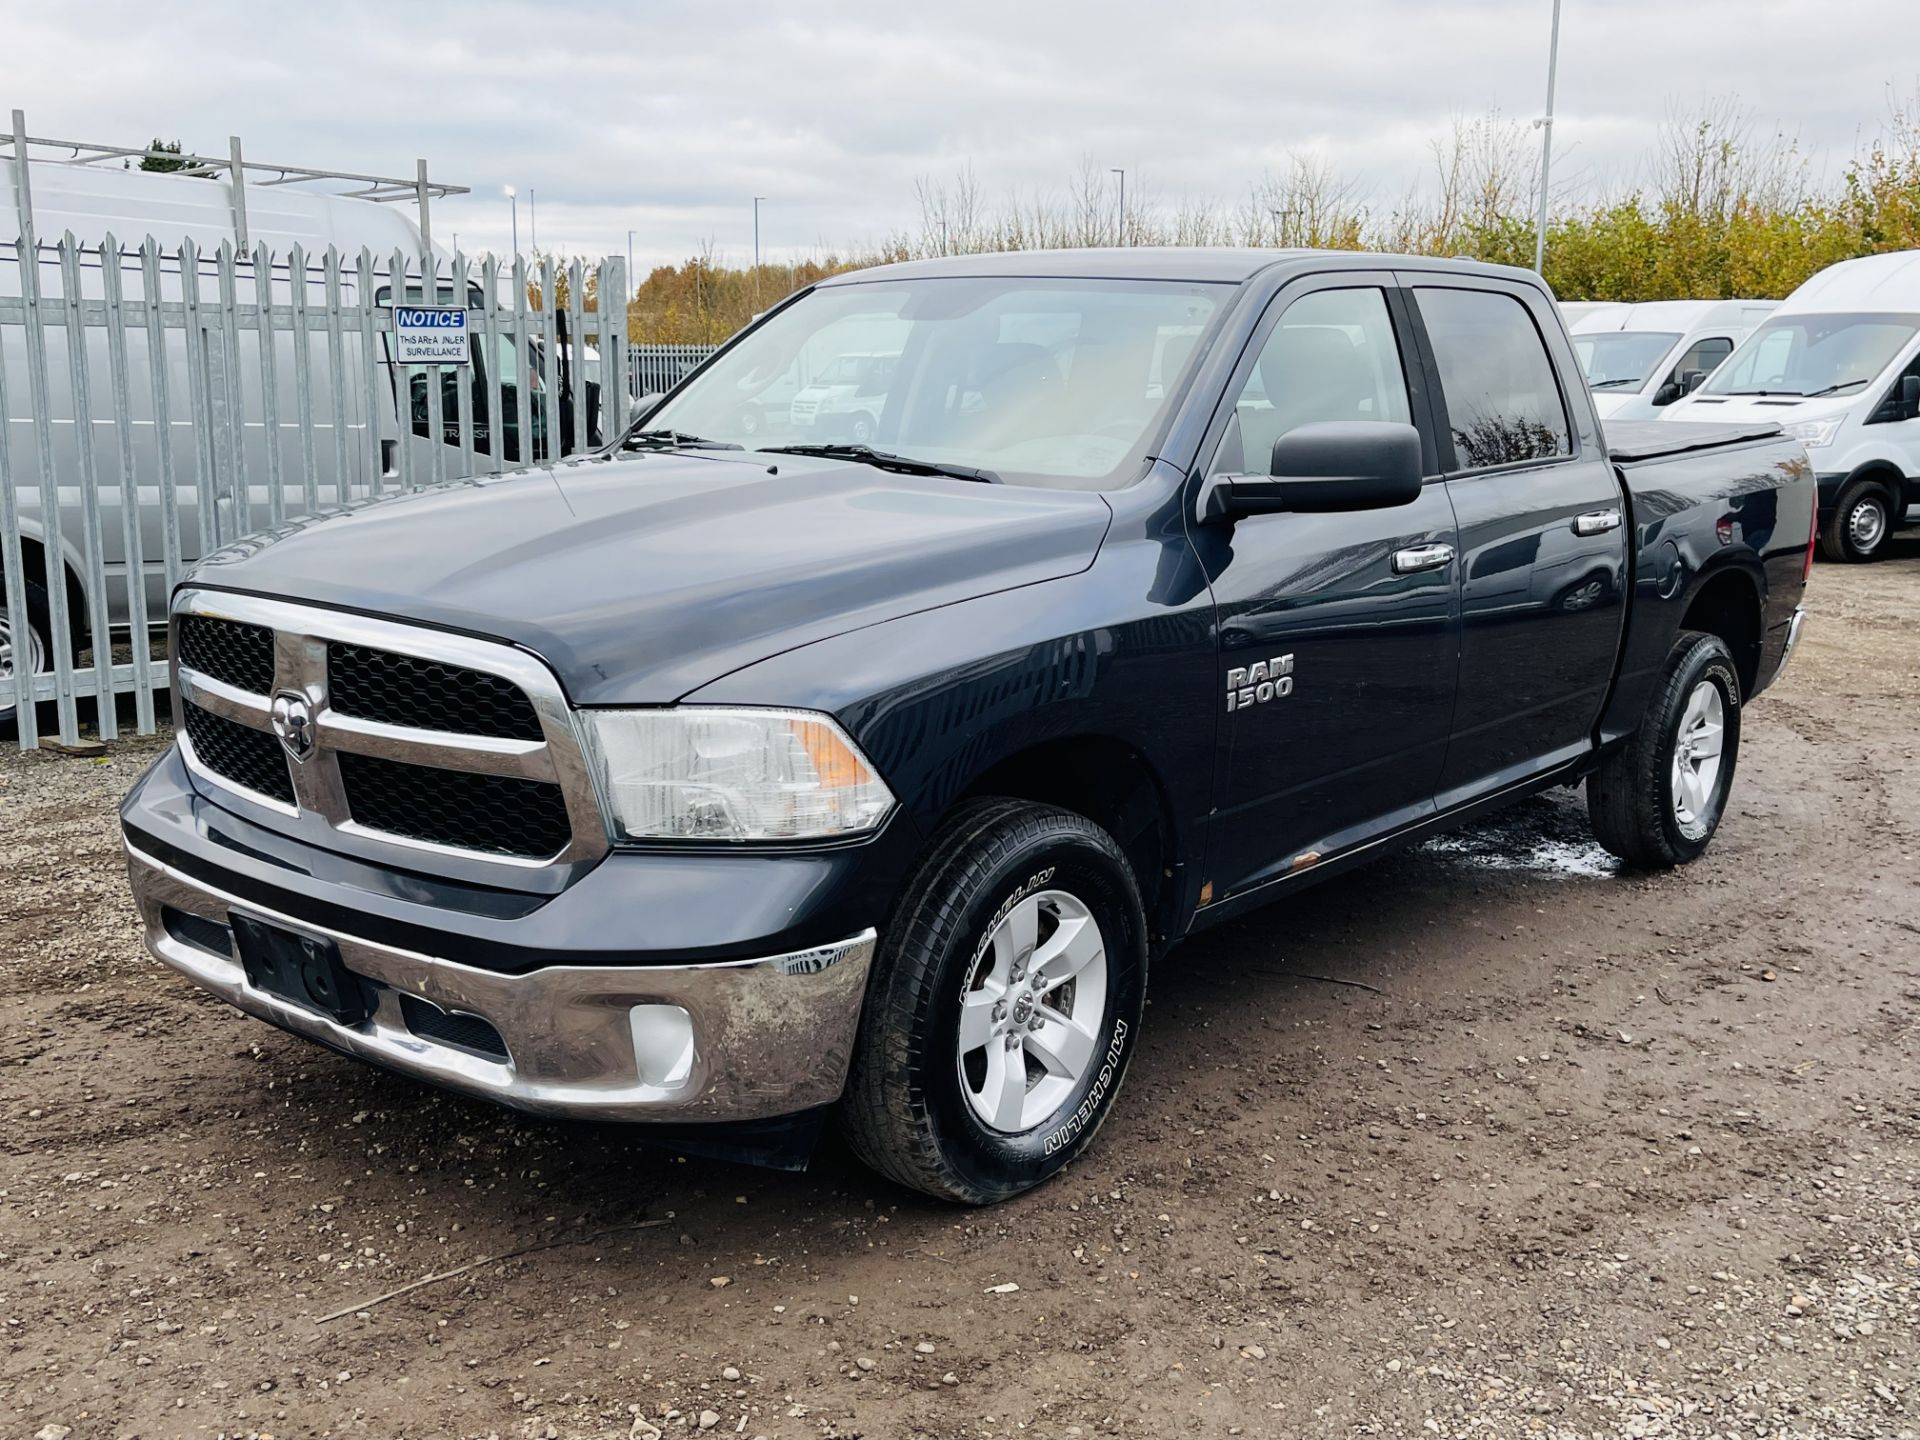 Dodge Ram 3.6 V6 1500 Crew Cab SLT 4WD ' 2015 Year ' A/C - 6 Seats - Chrome Package - Image 2 of 21